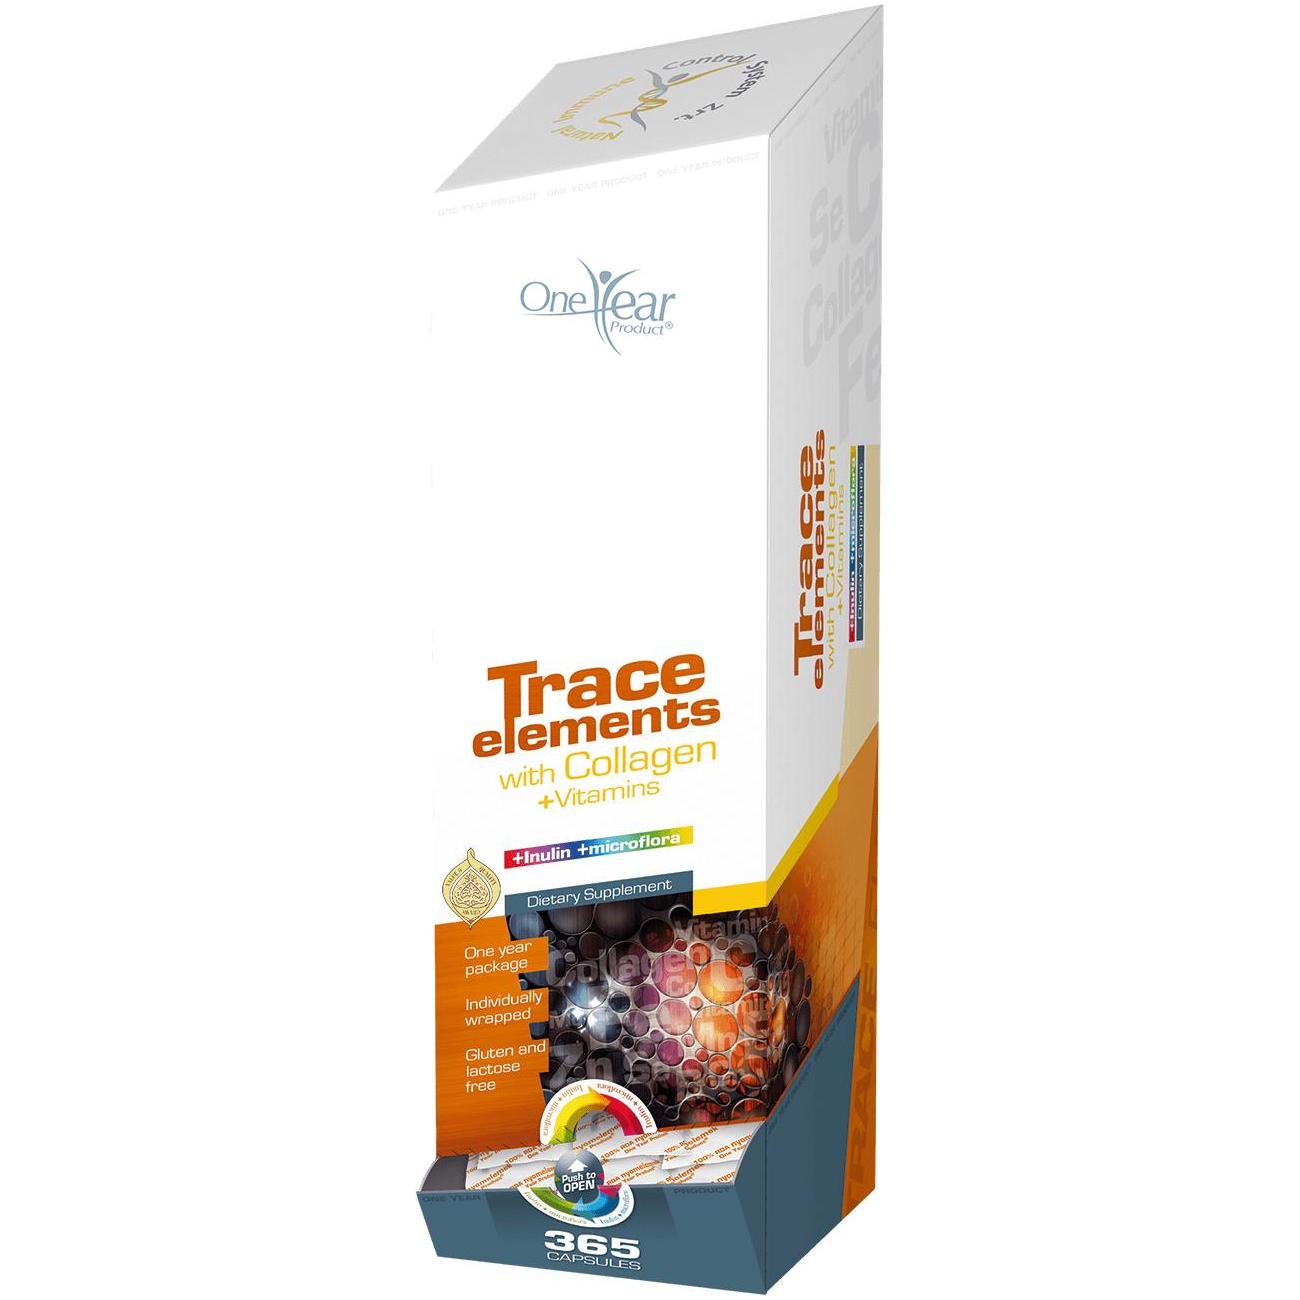 Trace Elements with Collagen